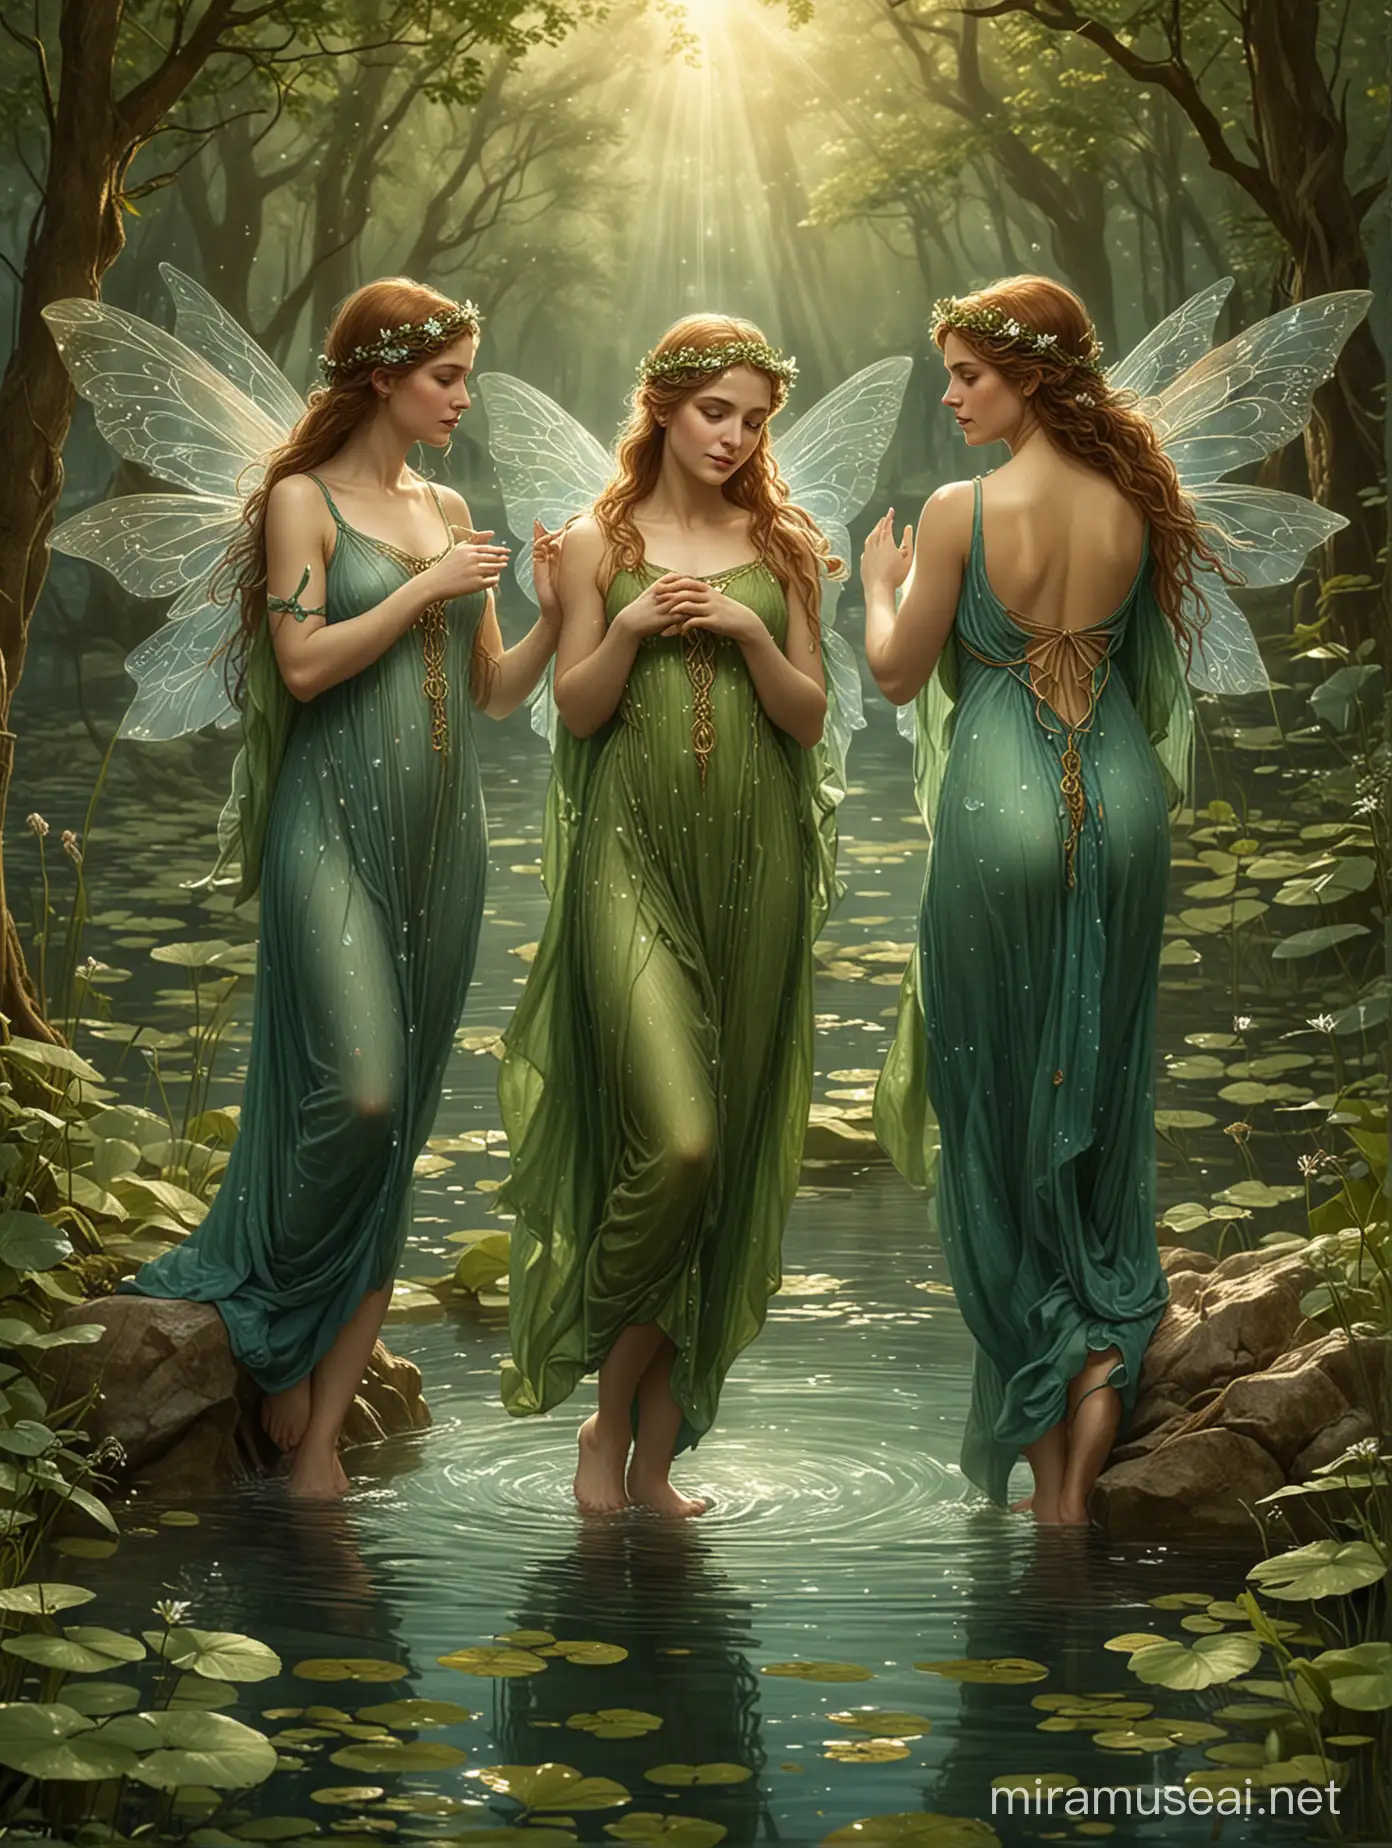 water fairies, The Benaszké or Naias as they are known in Greek mythology are a group of nymphs who are the caretakers of springs, wells, Celtic druidic tale illustration in a mystical and enchanting style